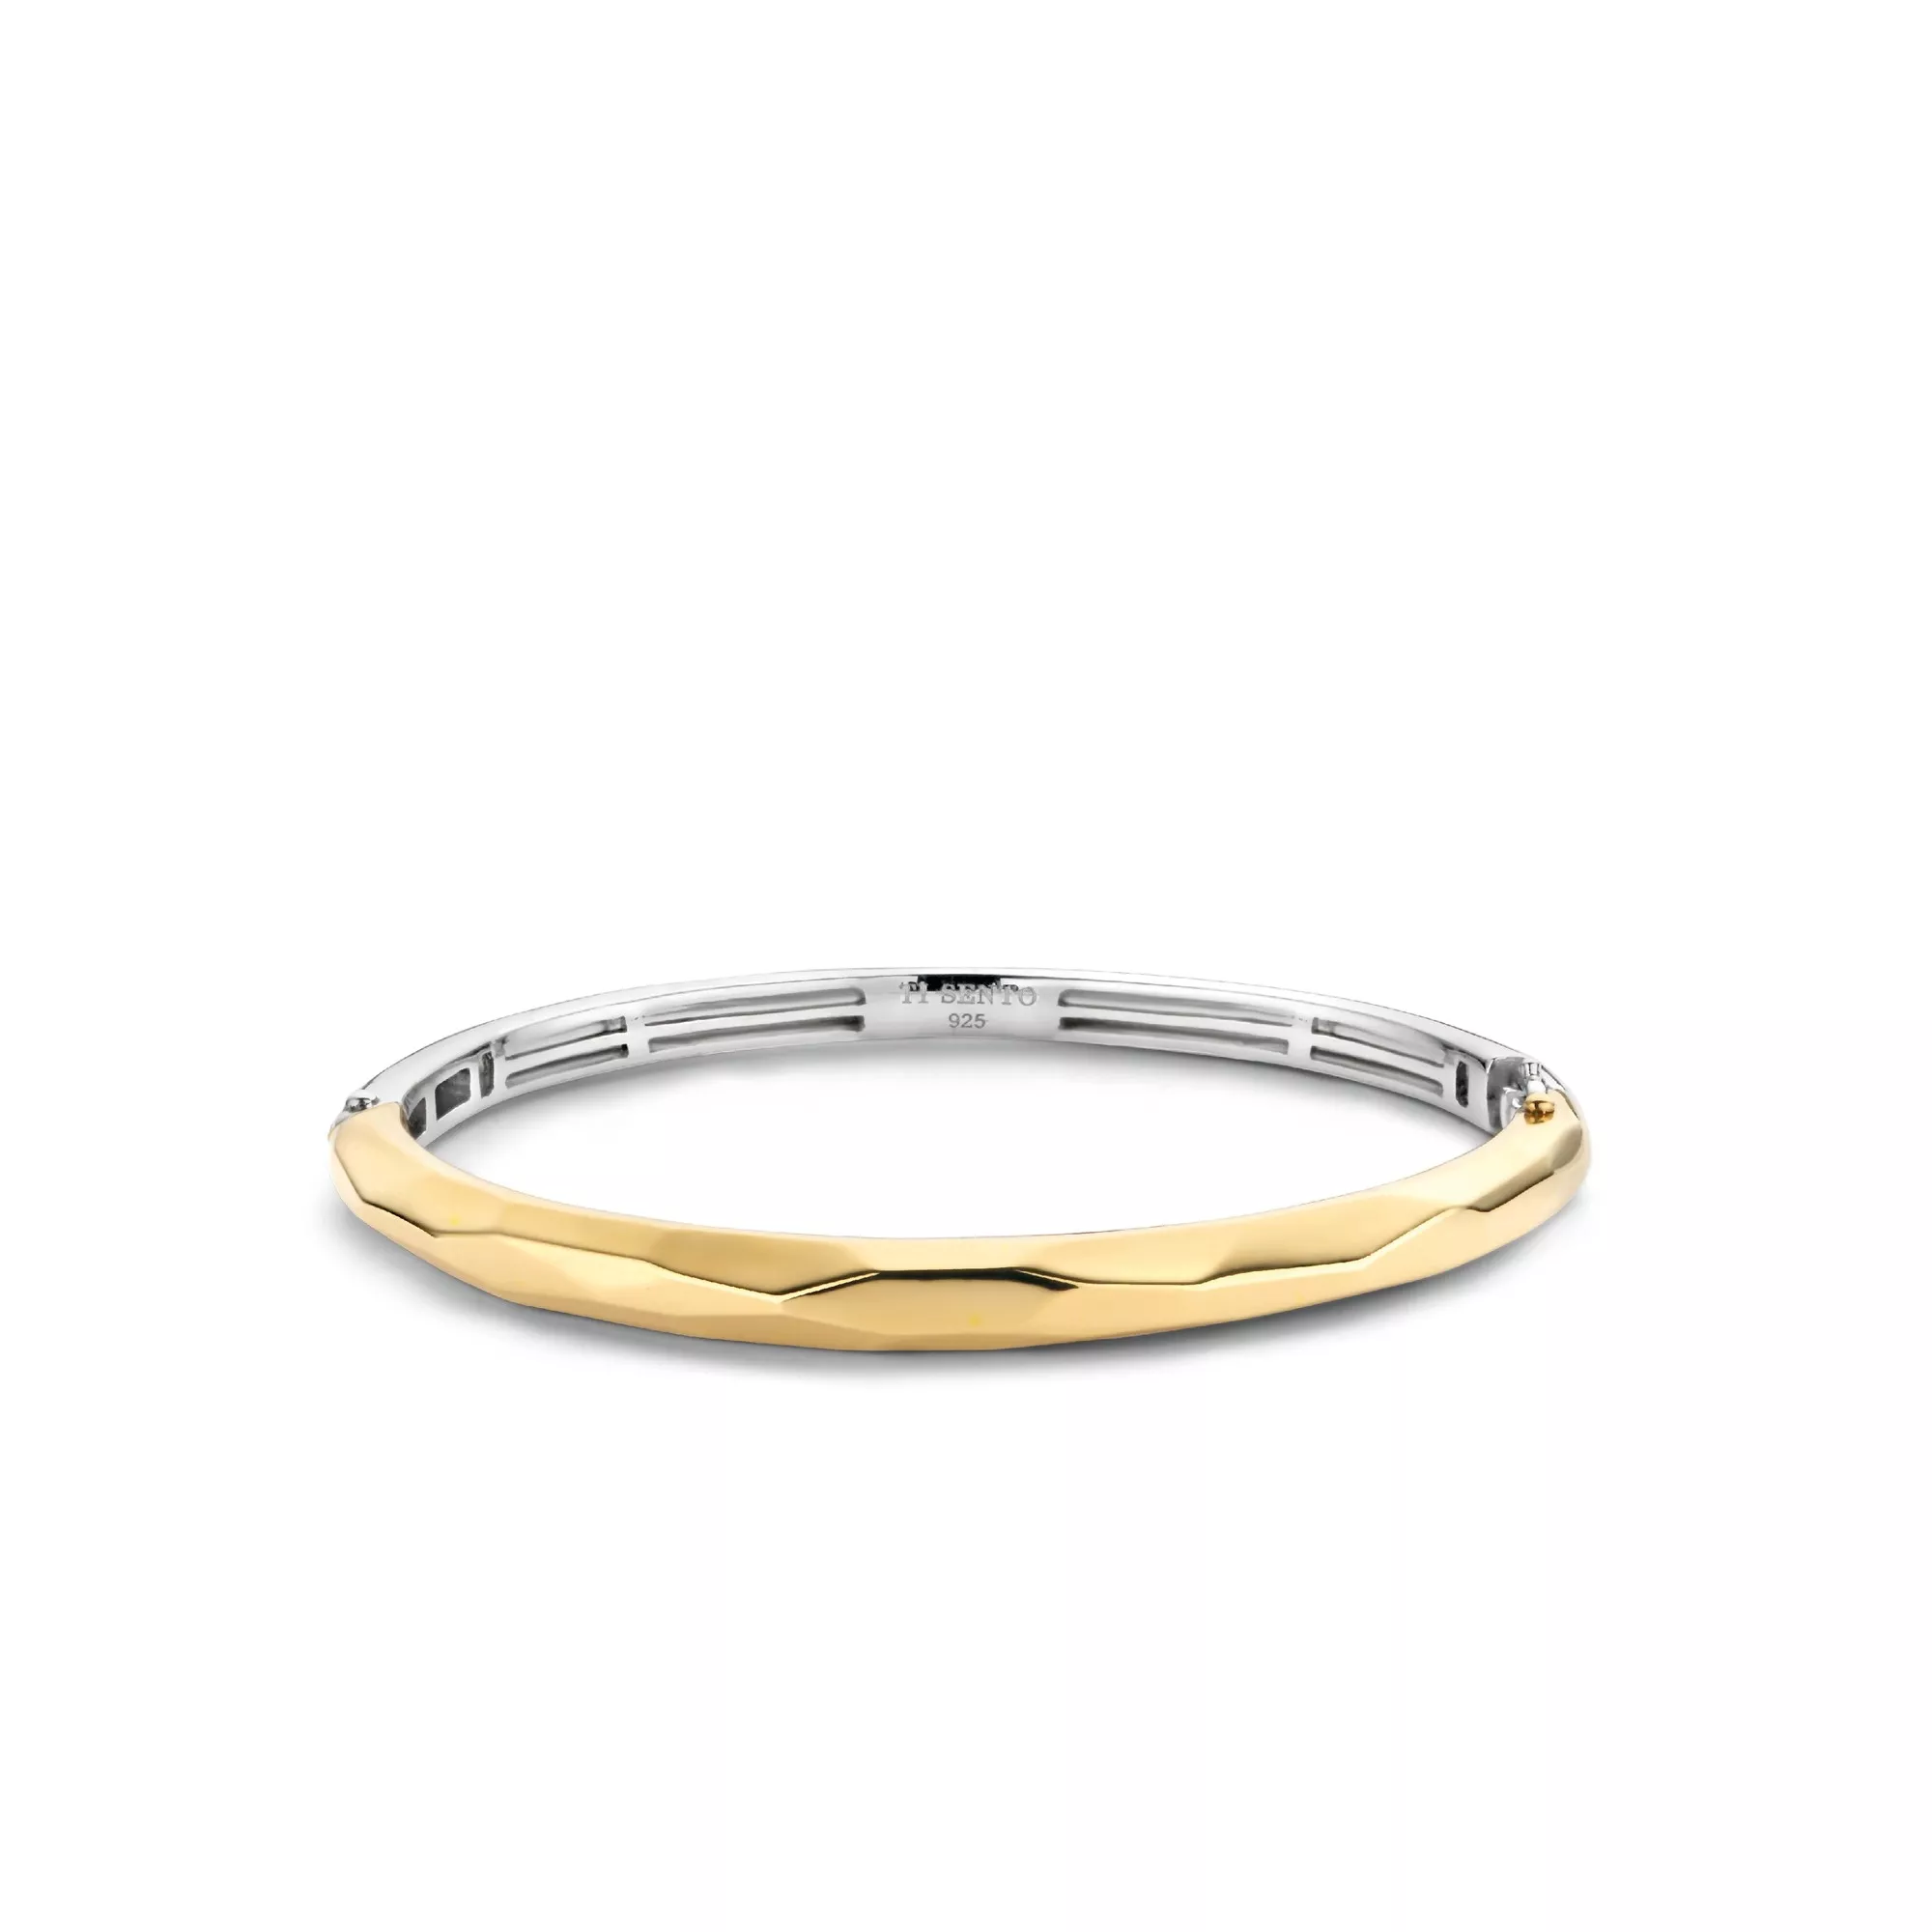 TI SENTO - Milano Armband 2942SY Zilver gold plated 50 x 60 mm